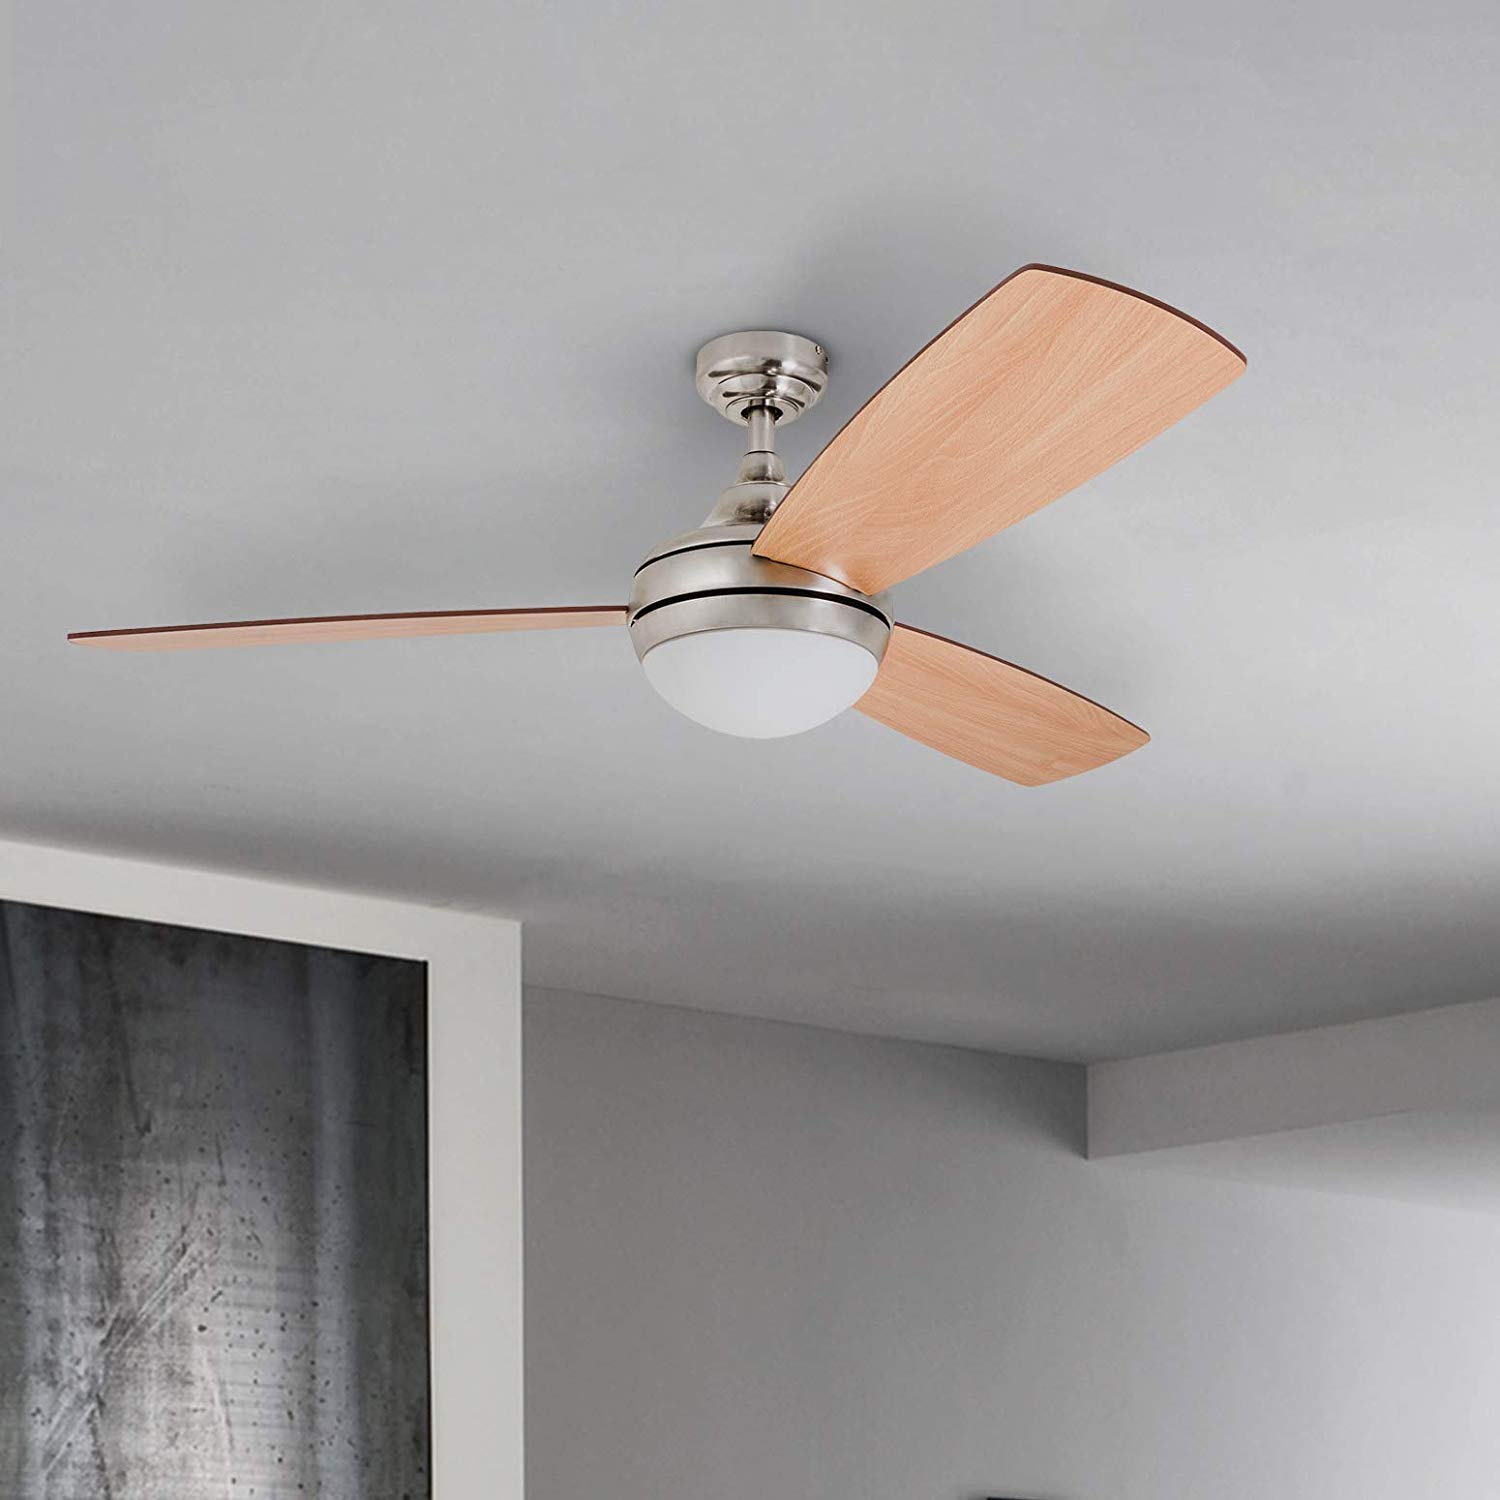 52 Inch Calico, Brushed Nickel, Remote Control, Ceiling Fan by Prominence Home